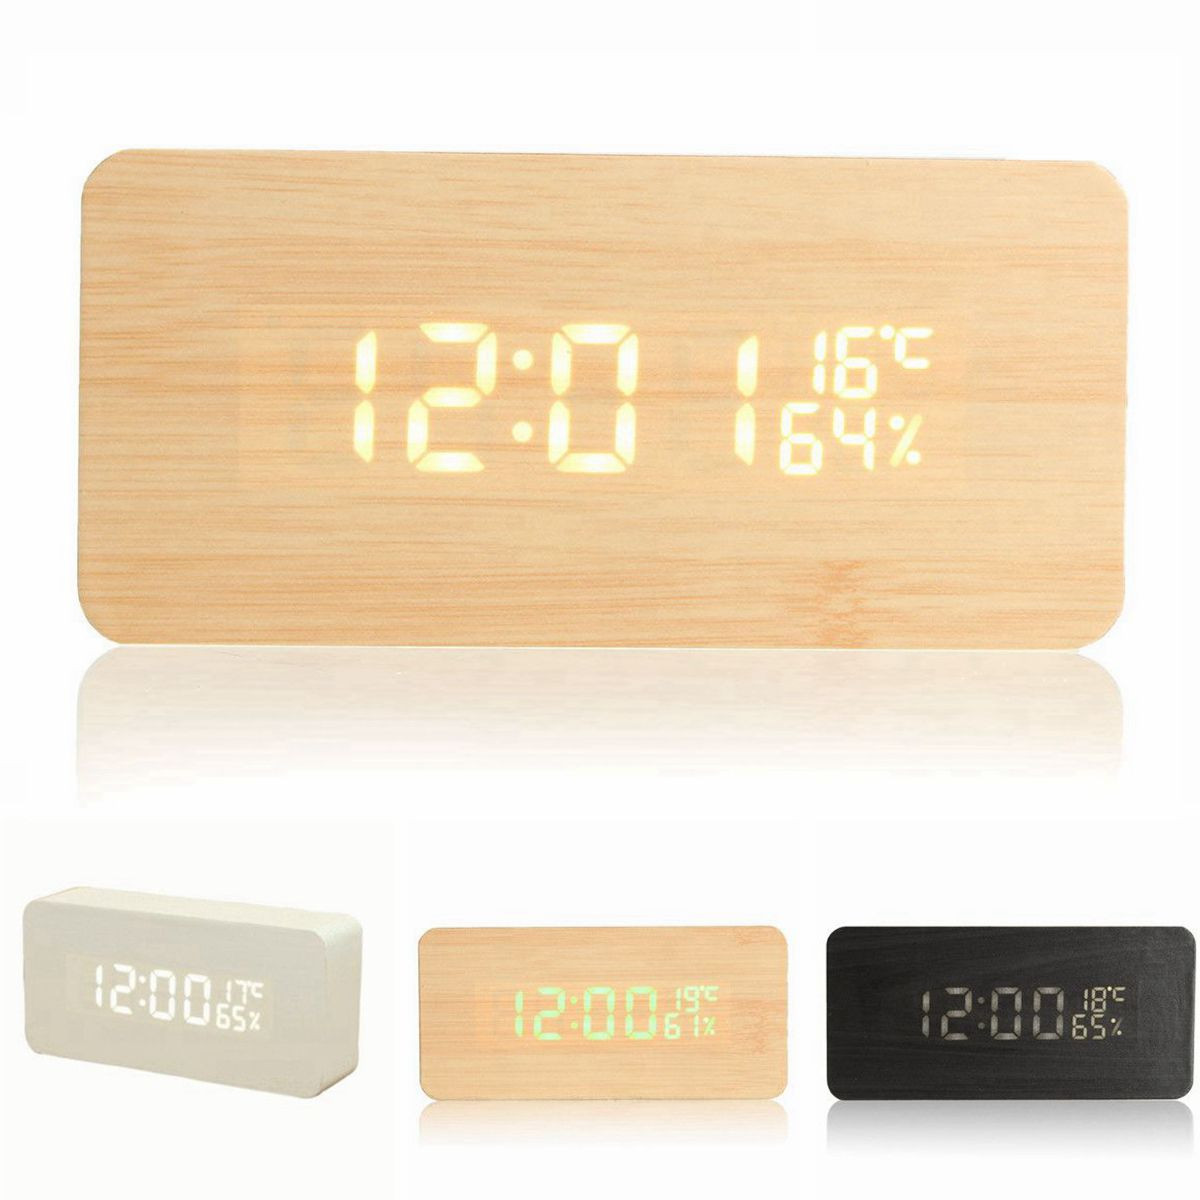 

USB Voice Control Wooden Wooden Rectangle Temperature LED Digital Alarm Clock Humidity Thermometer